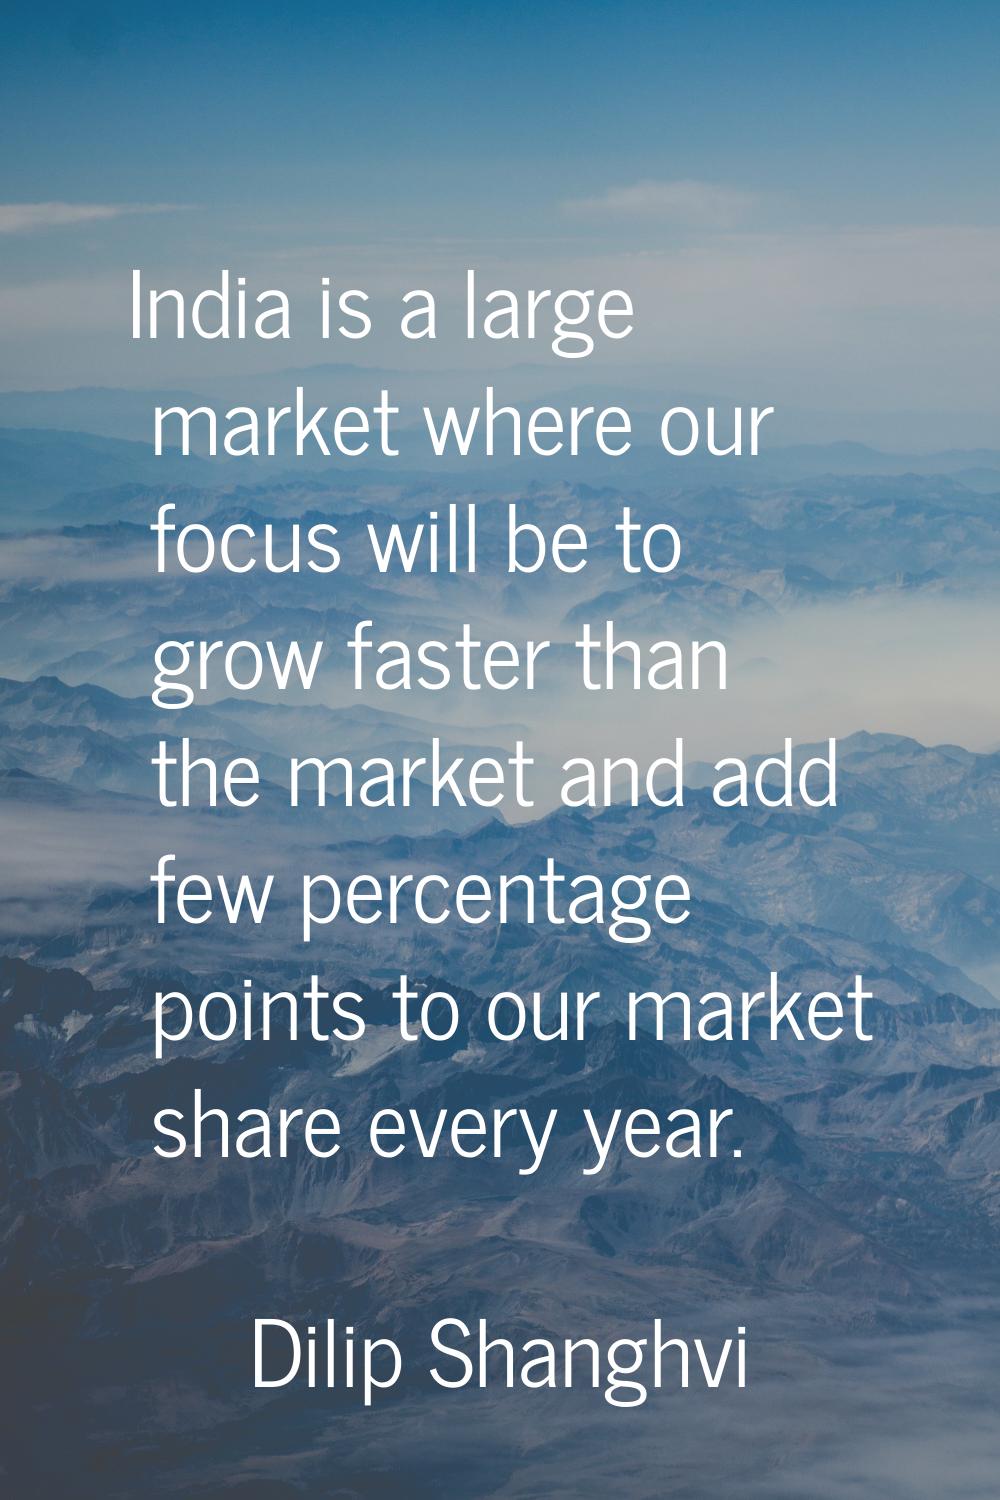 India is a large market where our focus will be to grow faster than the market and add few percenta